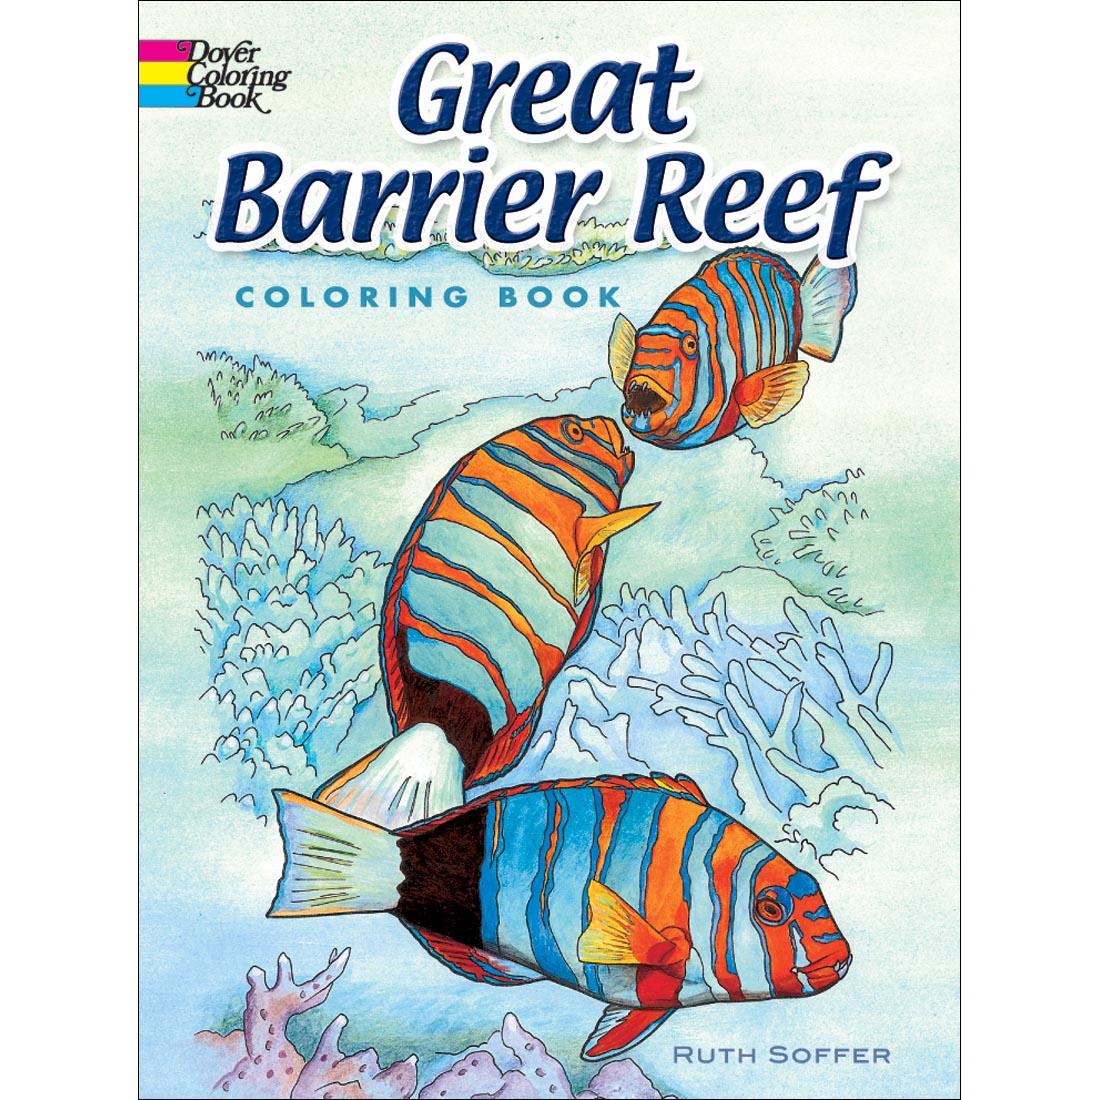 Great Barrier Reef Coloring Book by Dover